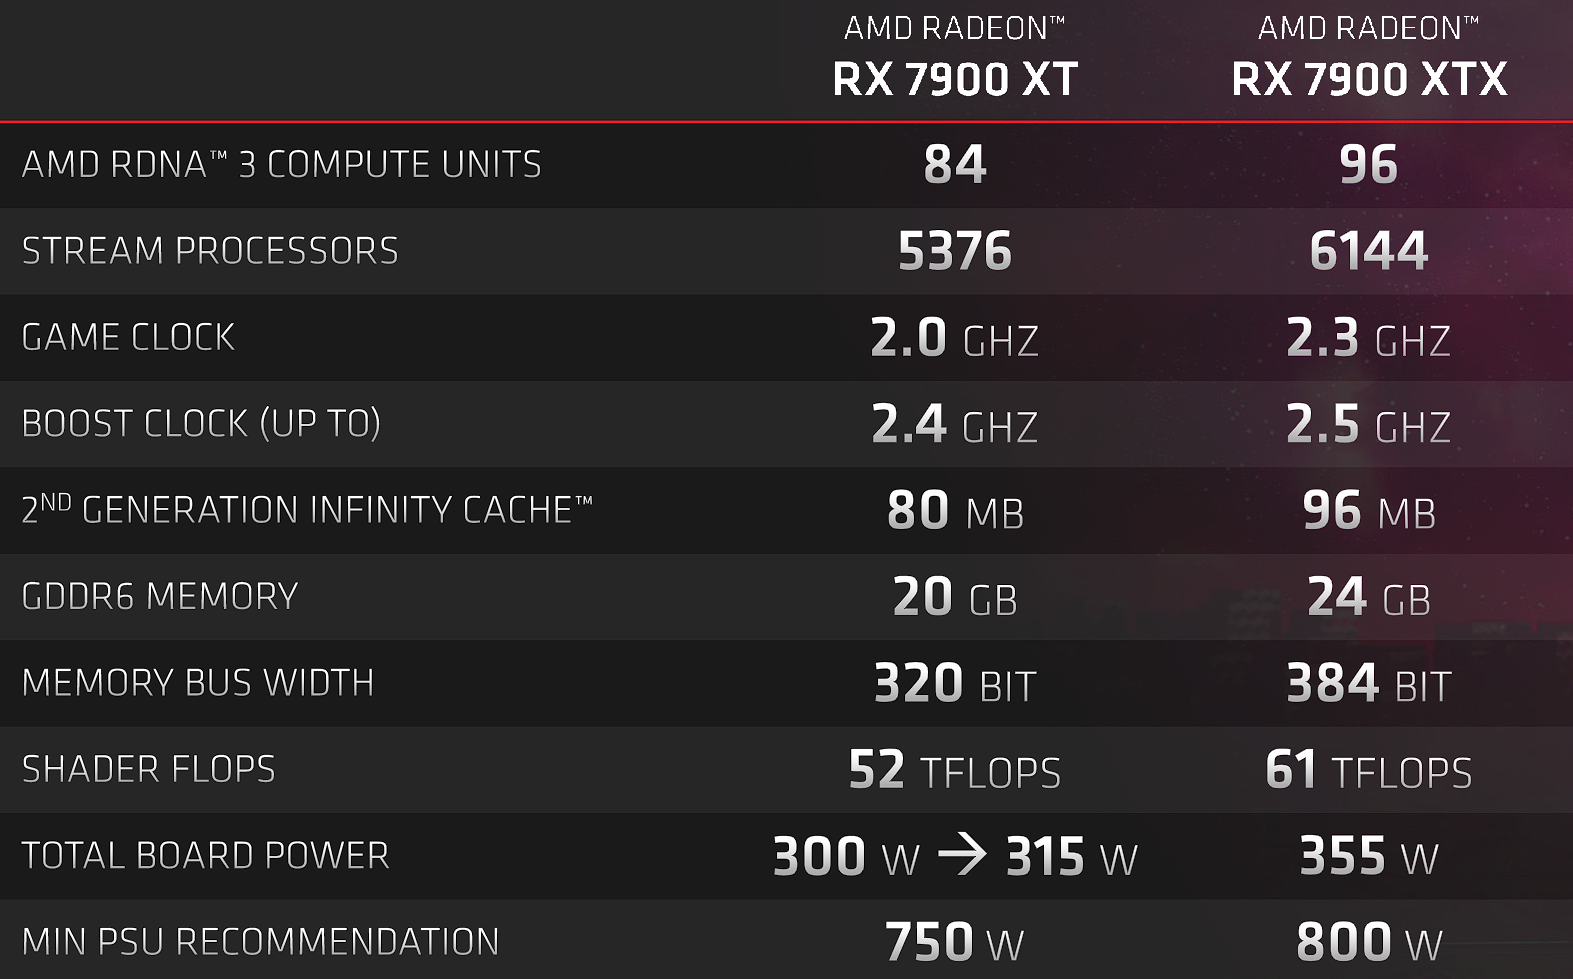 Since its initial announcement, AMD has updated the Total Board Power of the RX 7900 XT from 300W to 315W. (Graphic: AMD)